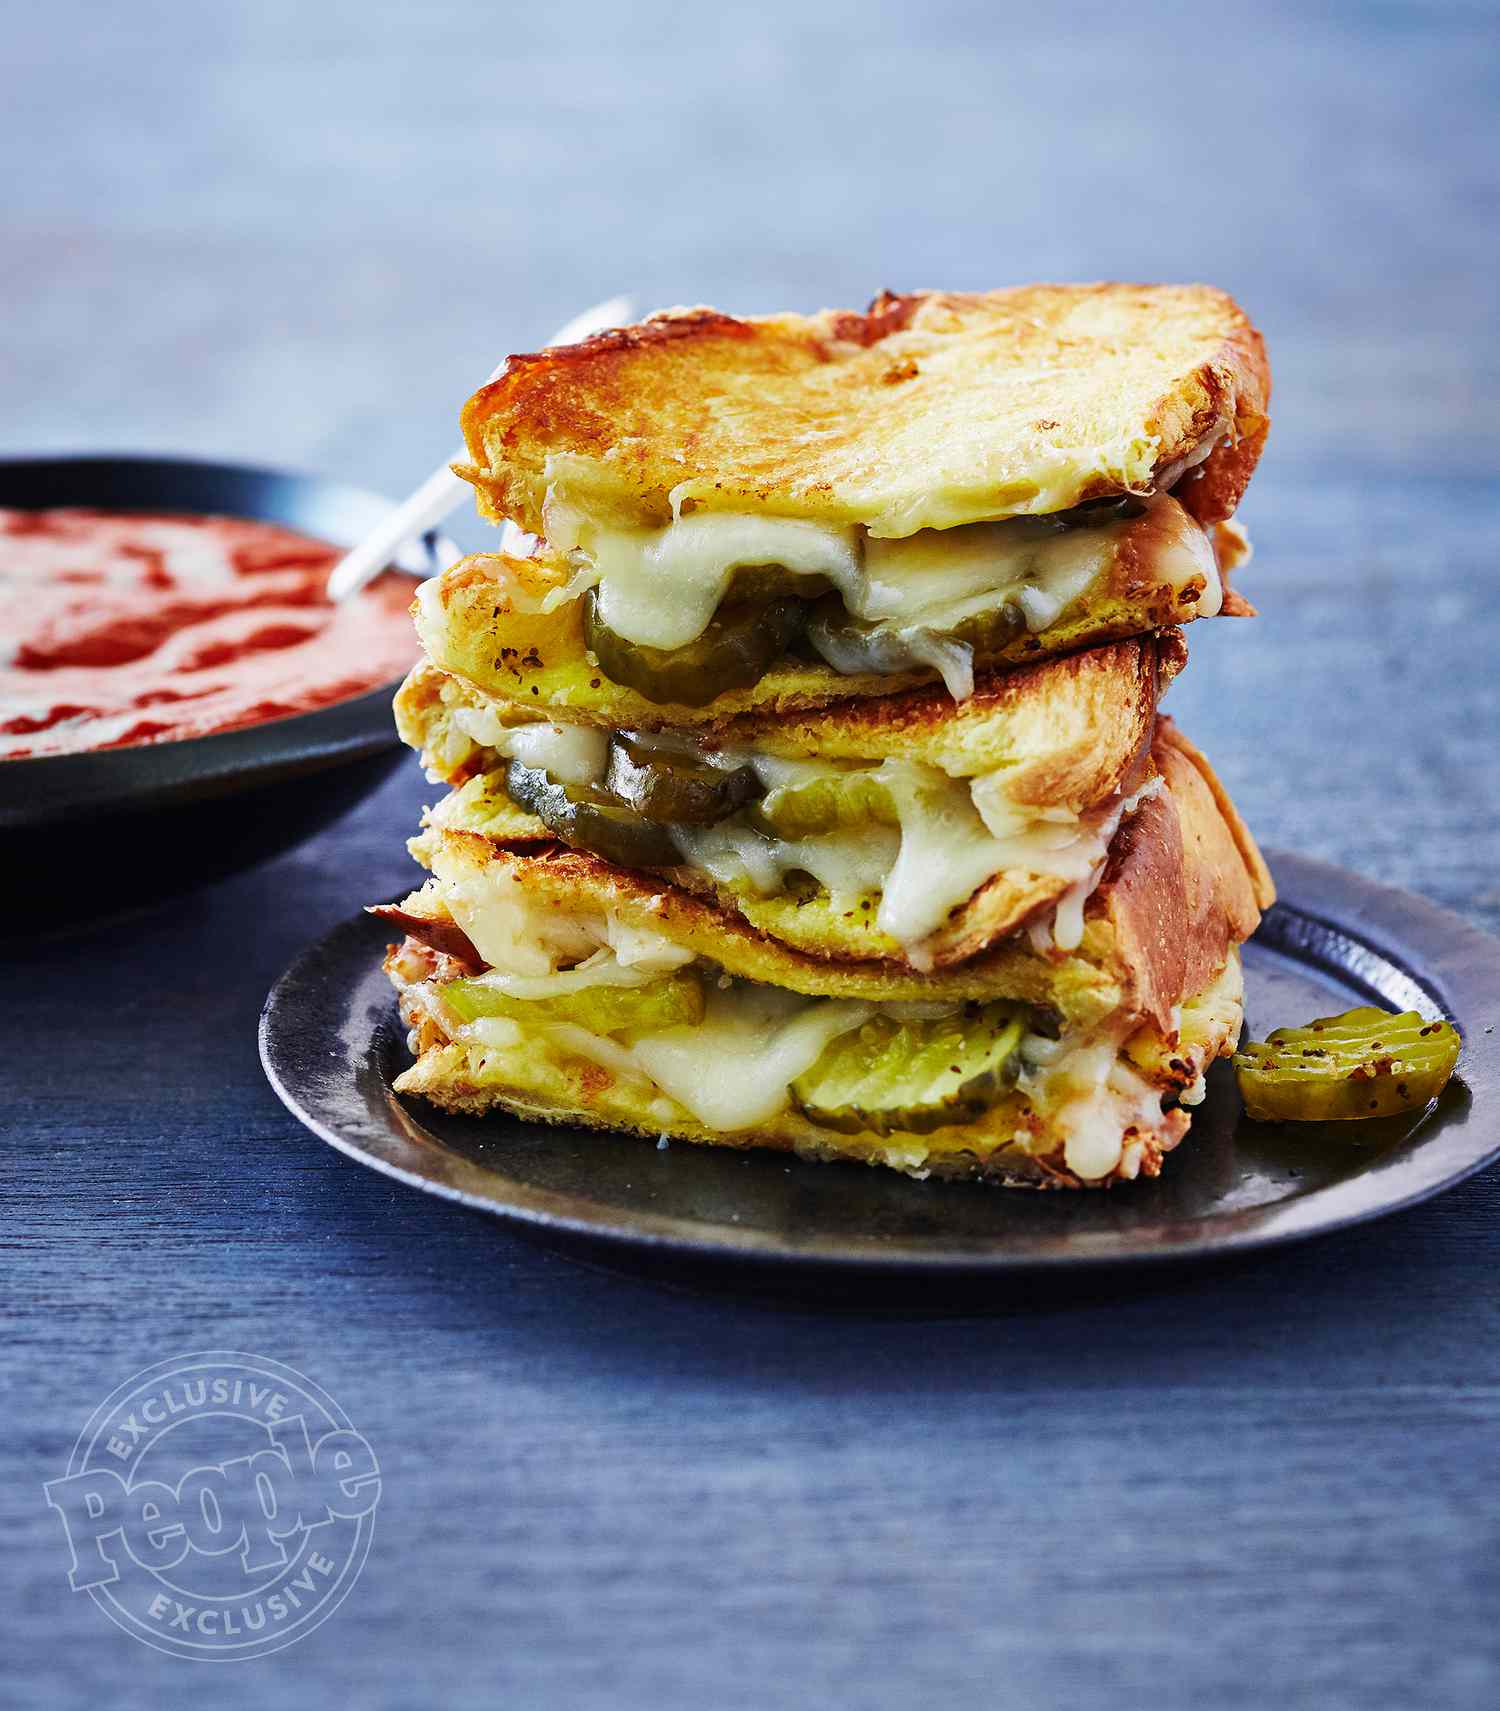 CUBAN-STYLE GRILLED CHEESE